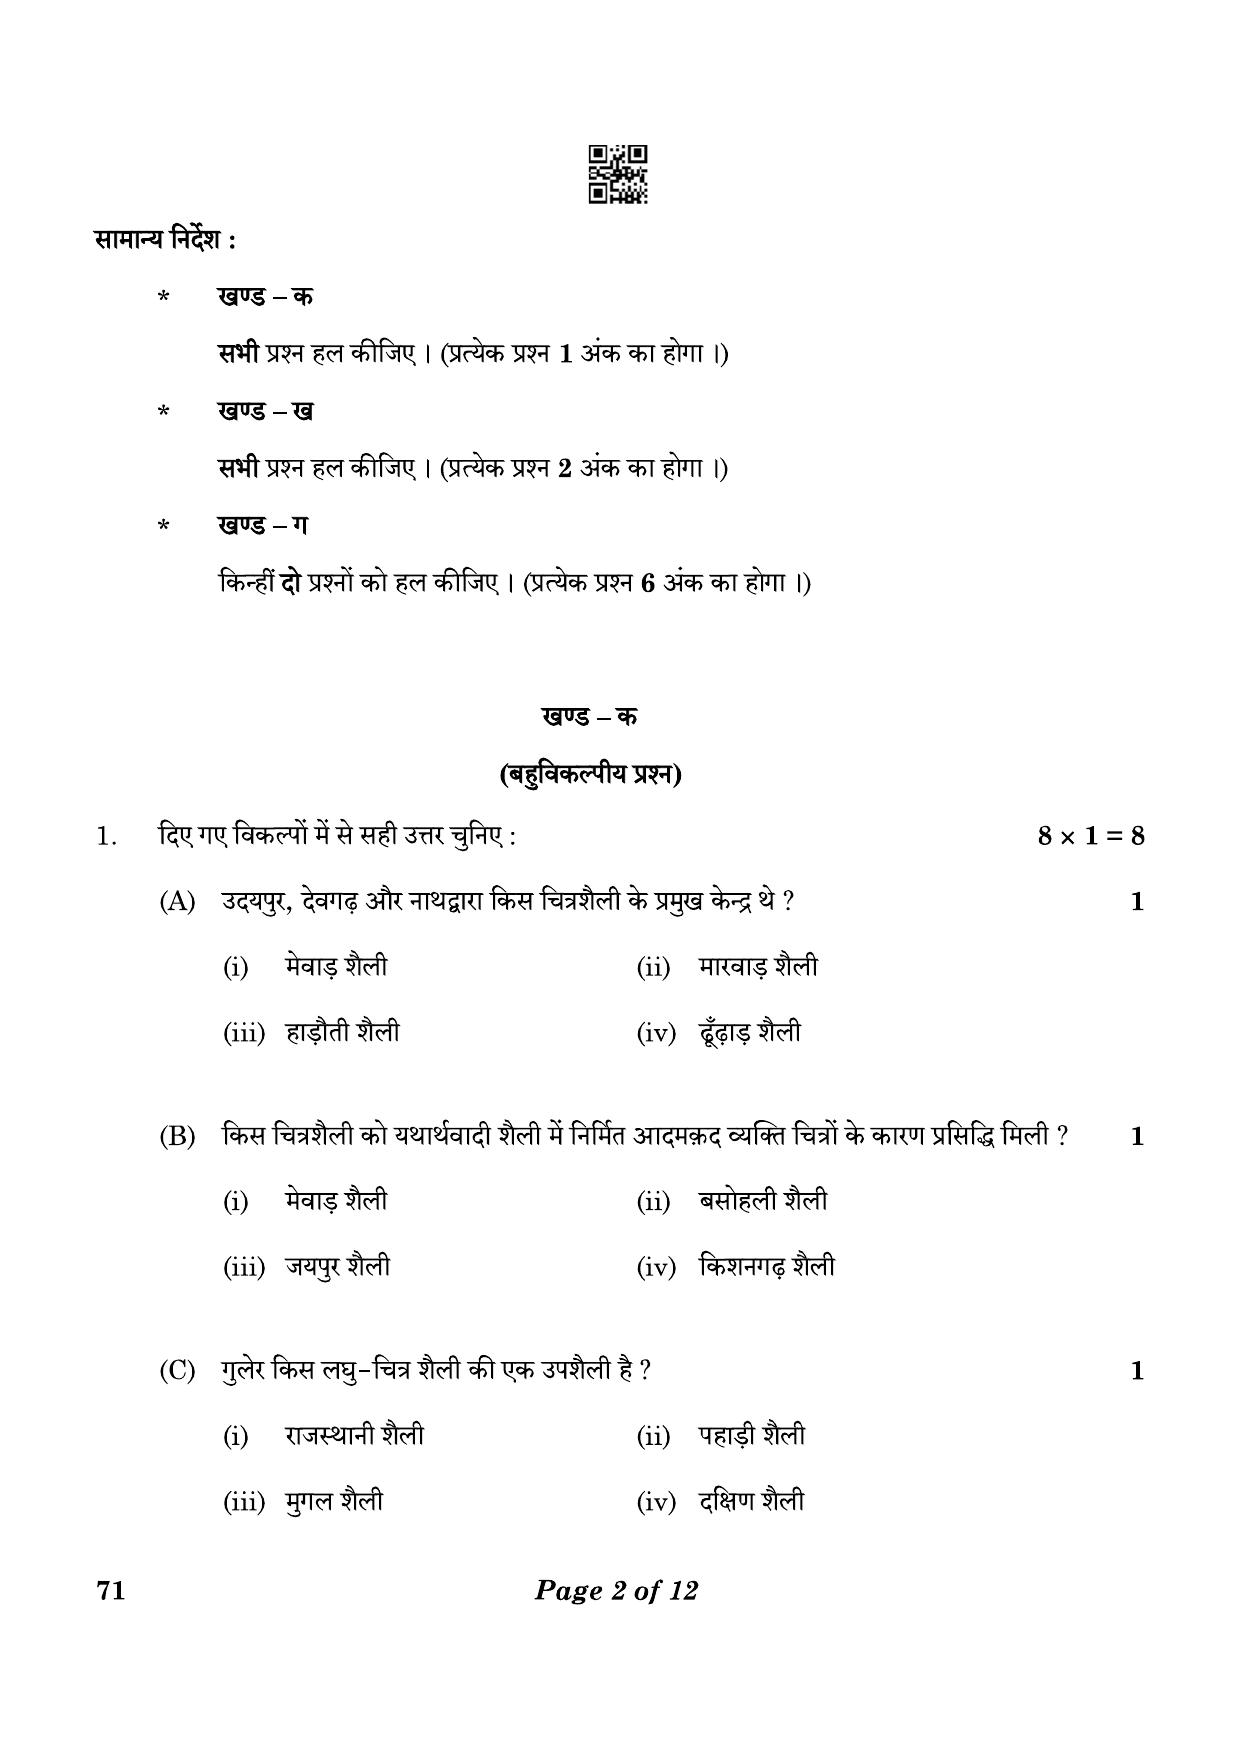 CBSE Class 12 71_Painting 2023 Question Paper - Page 2